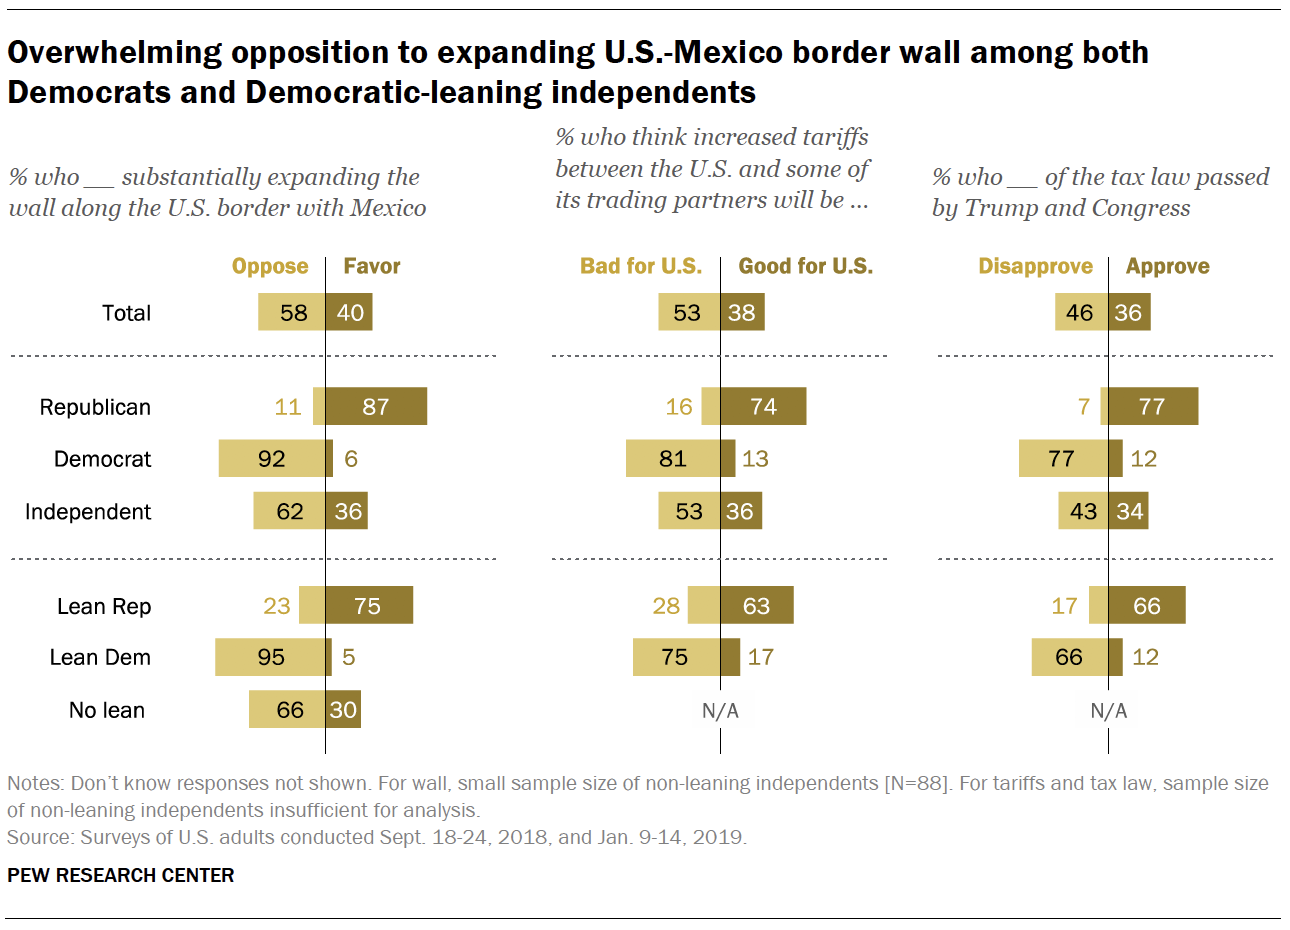 Overwhelming opposition to expanding U.S.-Mexico border wall among both Democrats and Democratic-leaning independents